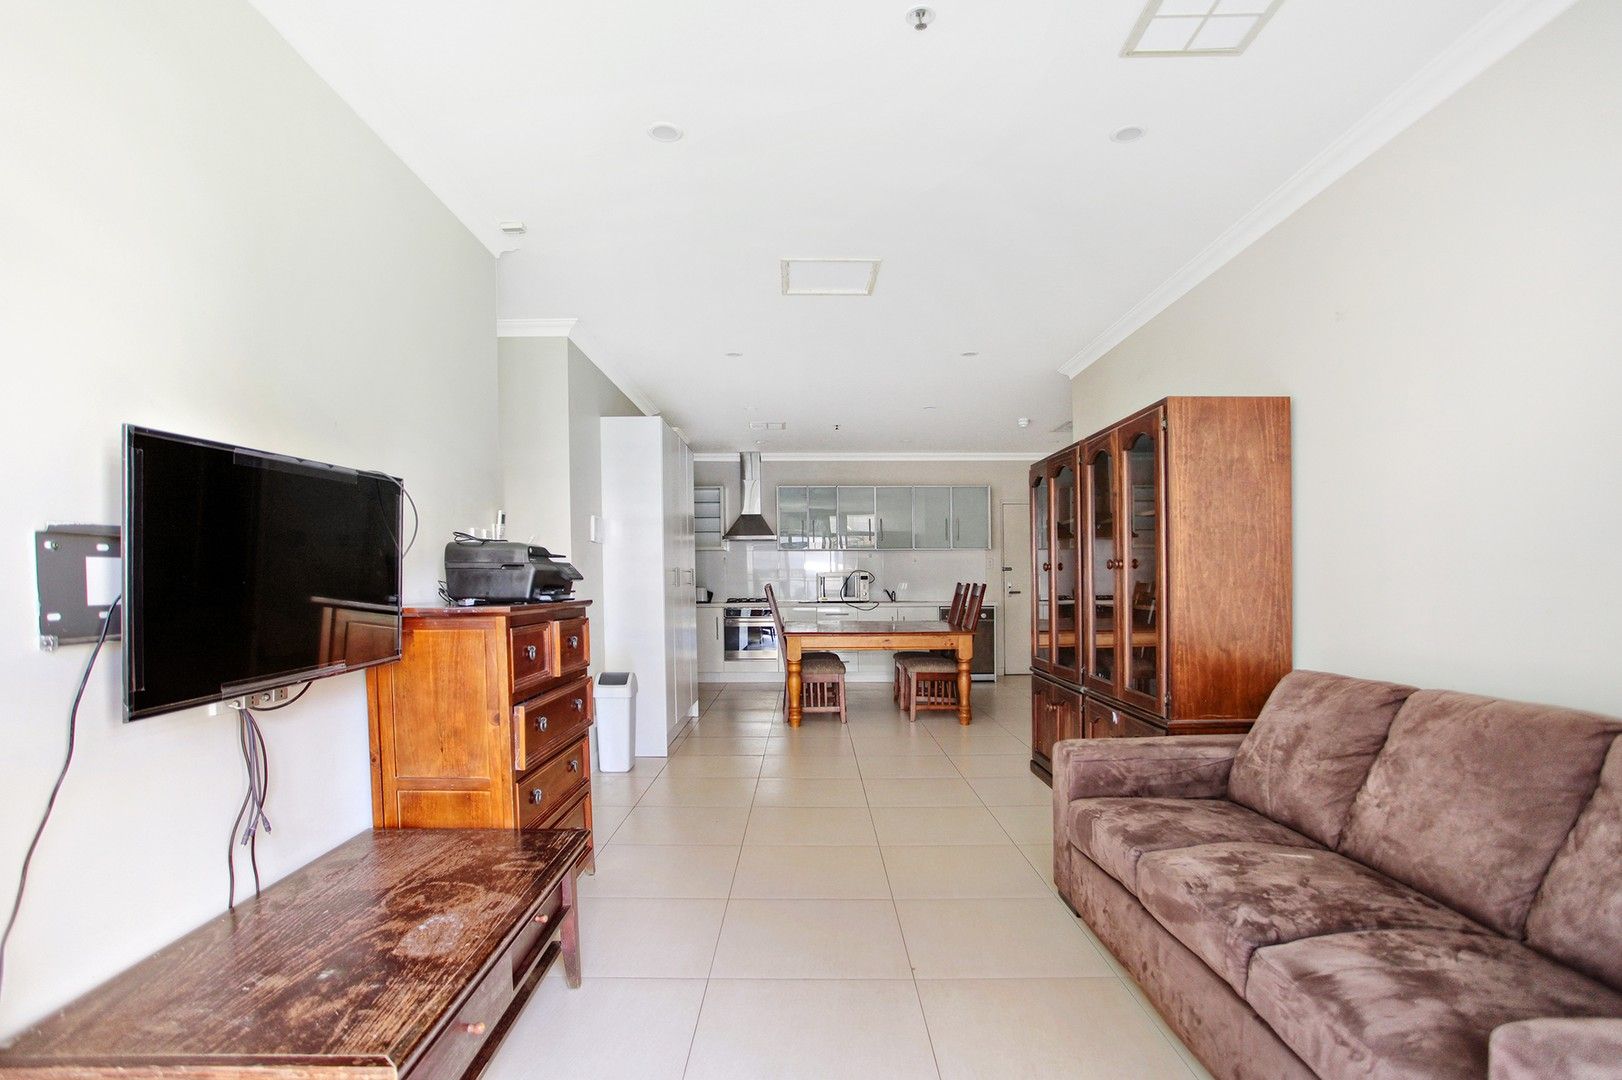 3 bedrooms Apartment / Unit / Flat in 506/39 Grenfell Street ADELAIDE SA, 5000